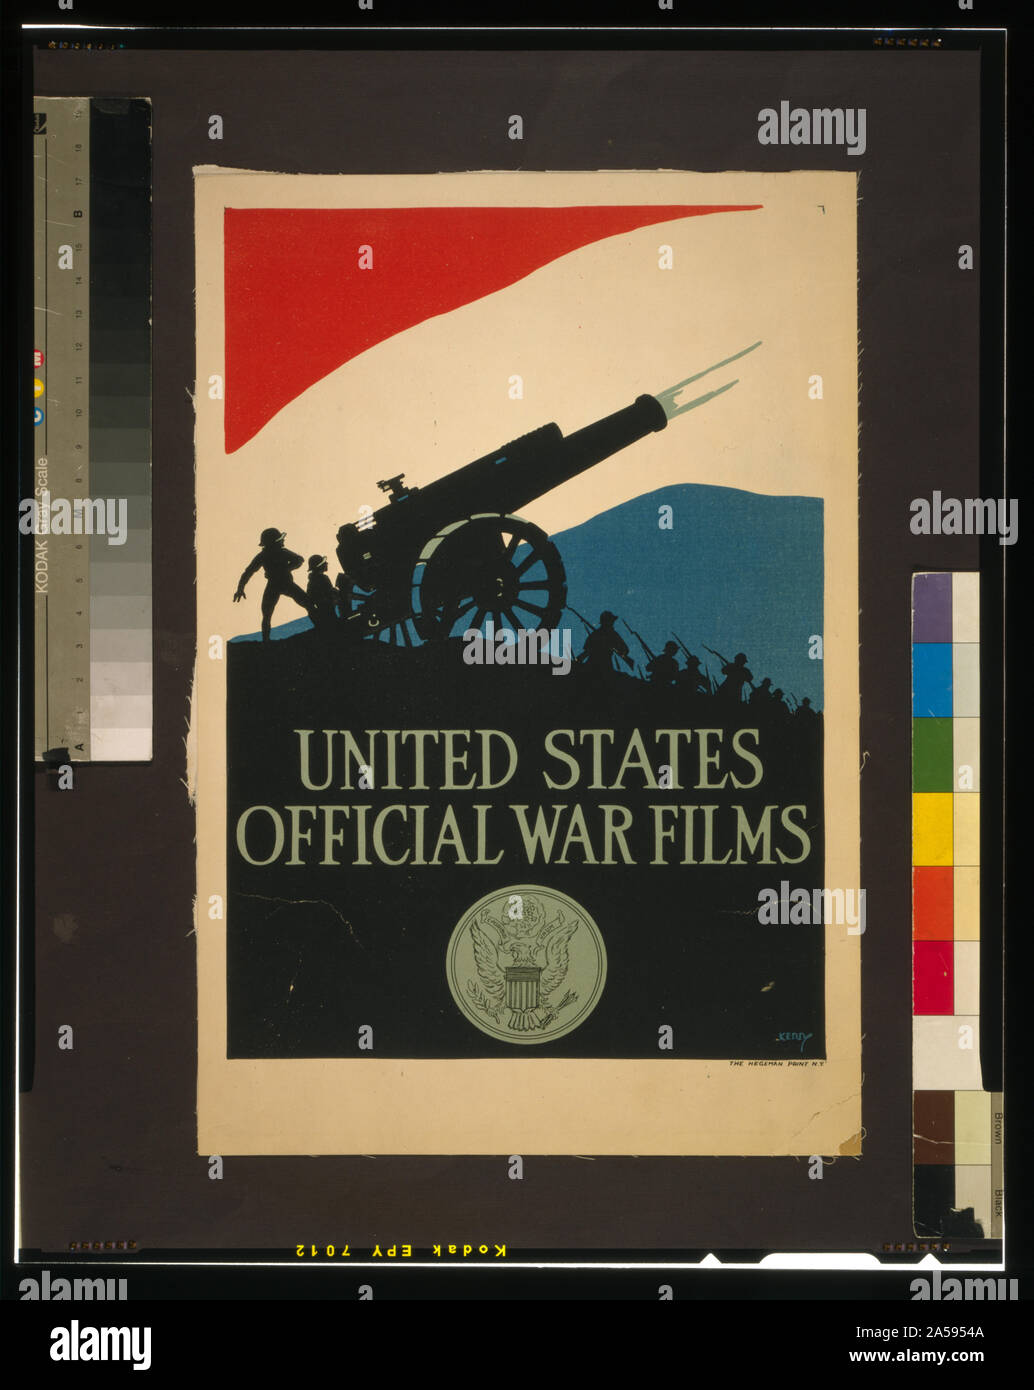 United States official war films Abstract: Poster showing silhouette of soldiers and firing cannon against a red, white, and blue sky, with United States seal below. Stock Photo